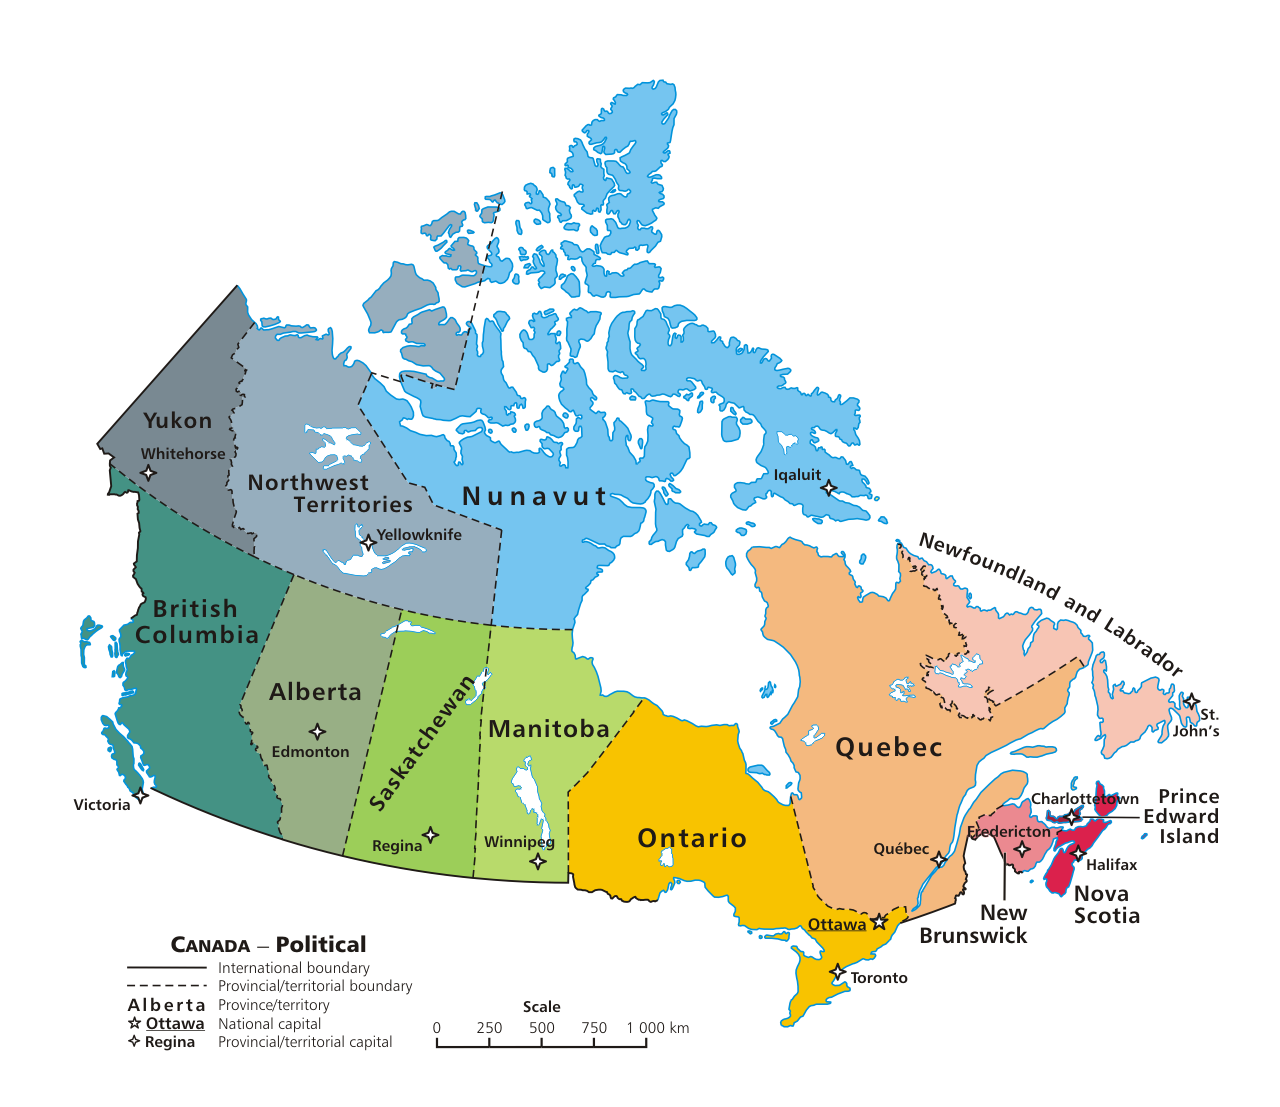 https://upload.wikimedia.org/wikipedia/commons/1/14/Political_map_of_Canada.png